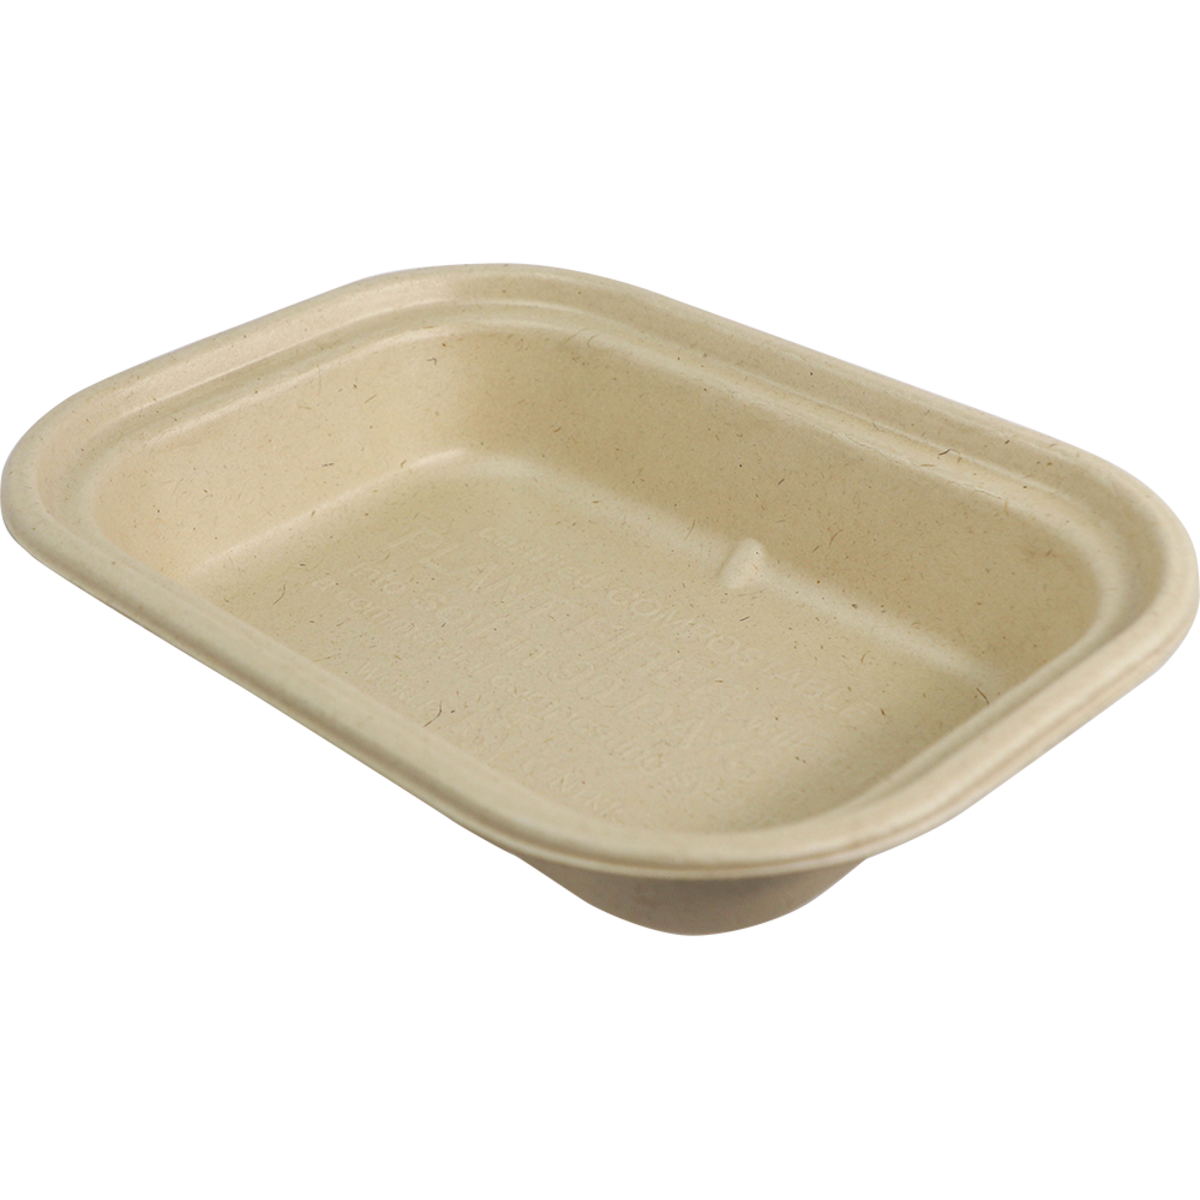 17 oz Compostable Fiber To Go Box Container with PLA Lining | (Case of 400)